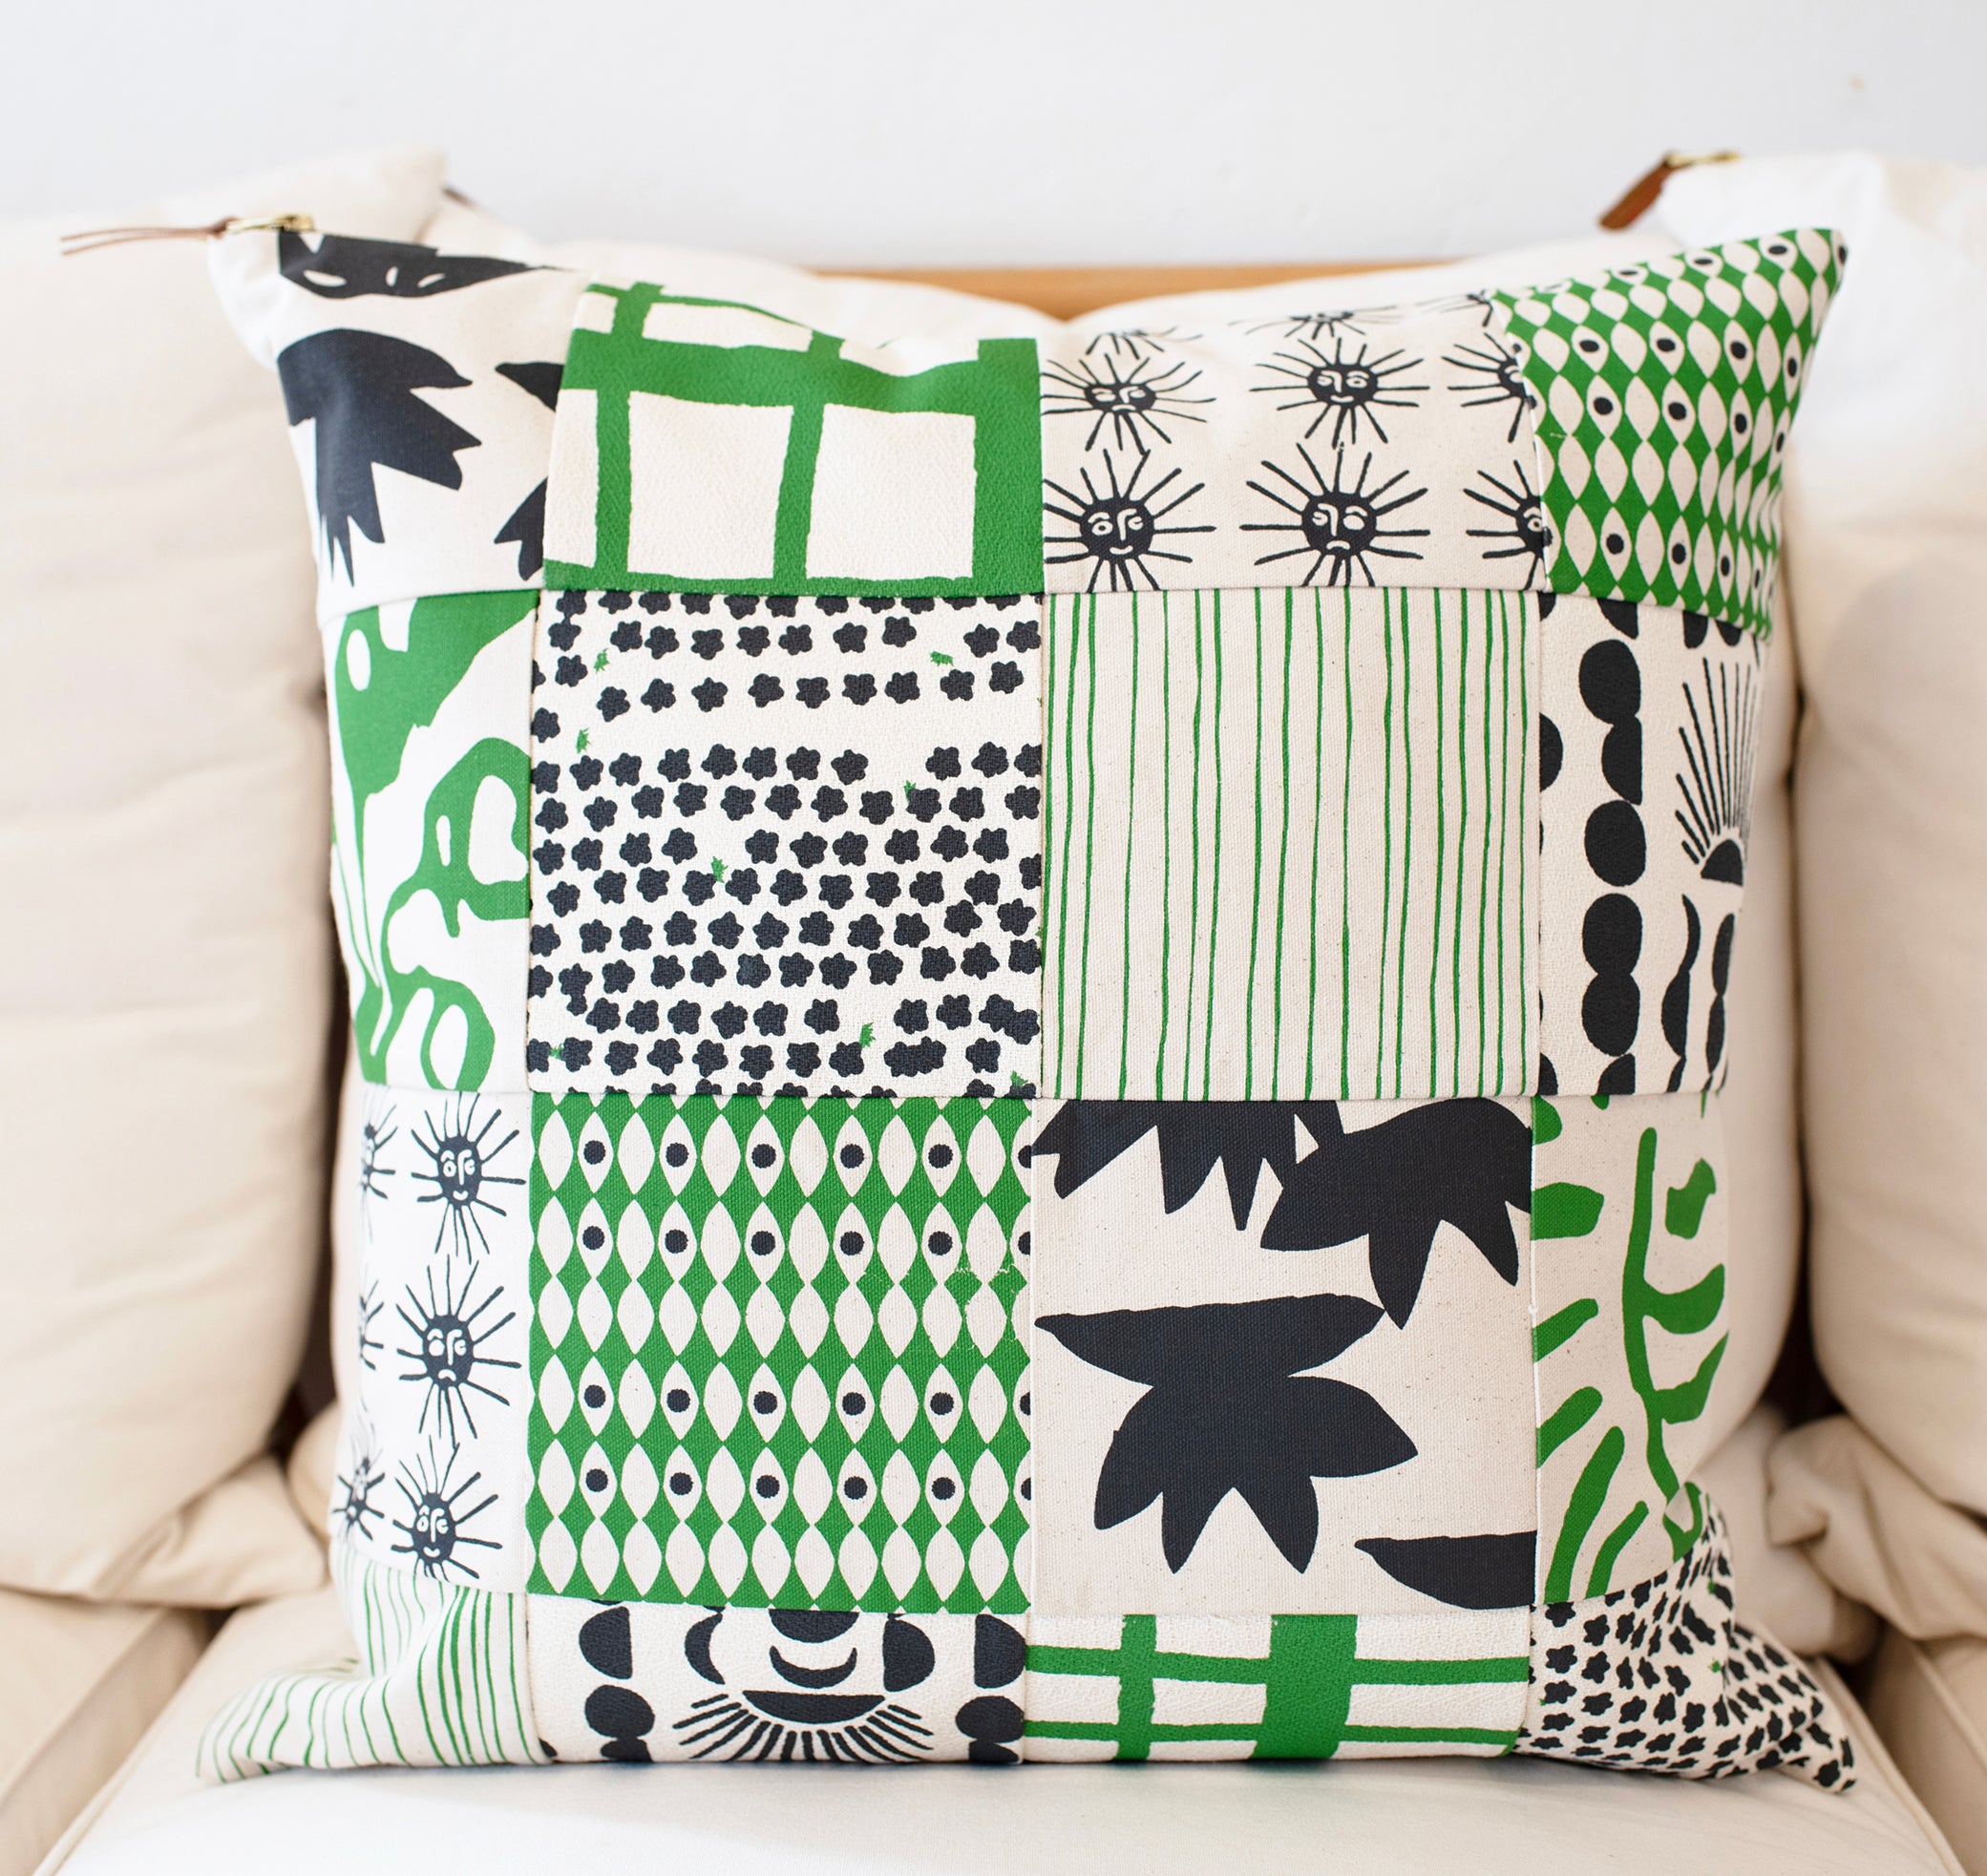 ONE OF A KIND PATCHWORK WORN BLACK AND KELLY GREEN PILLOW